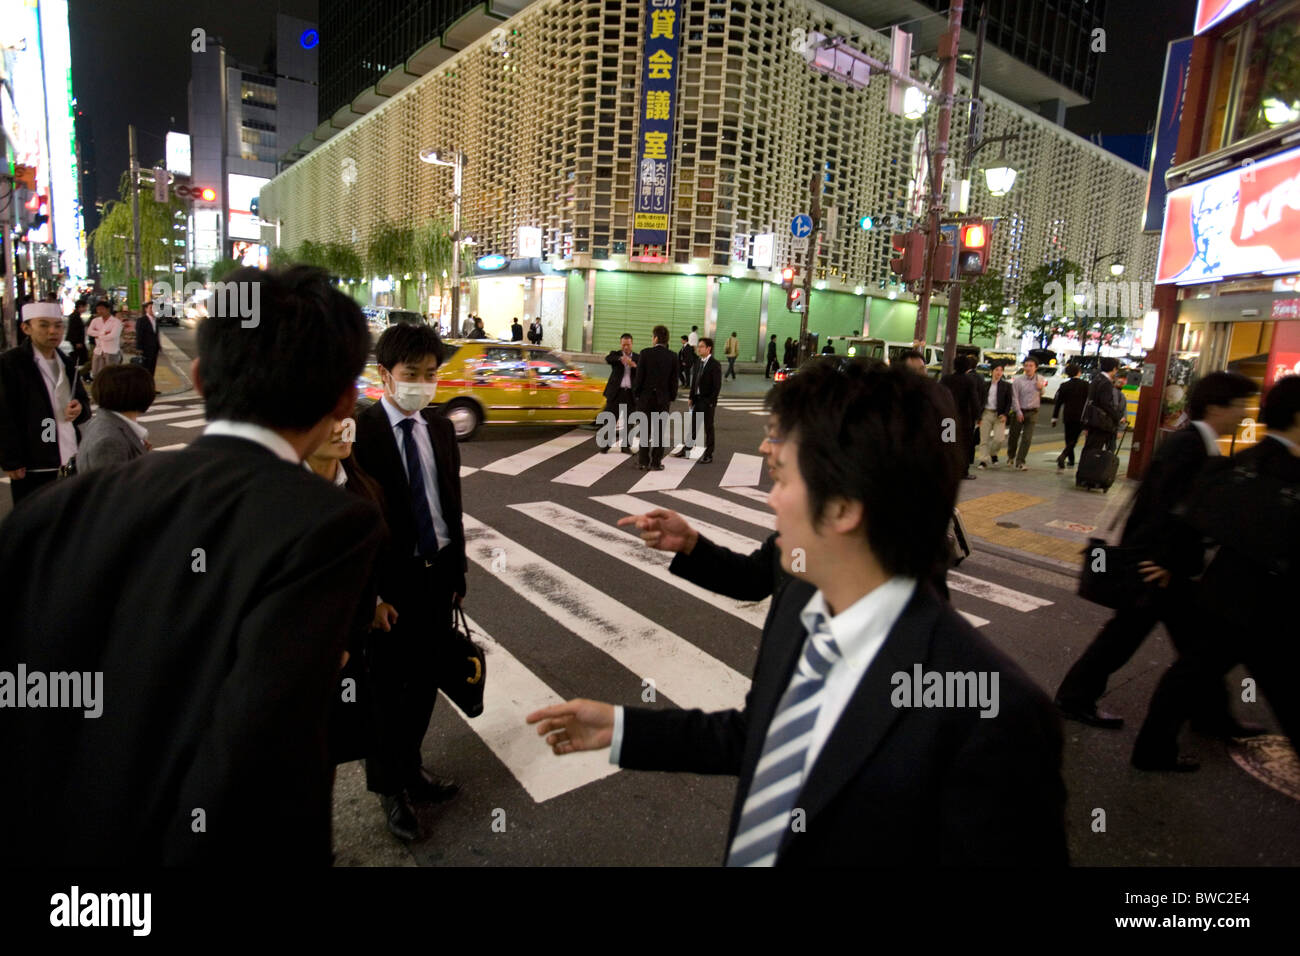 People in the street of Ginza at nighttime, Tokyo, Japan. Stock Photo